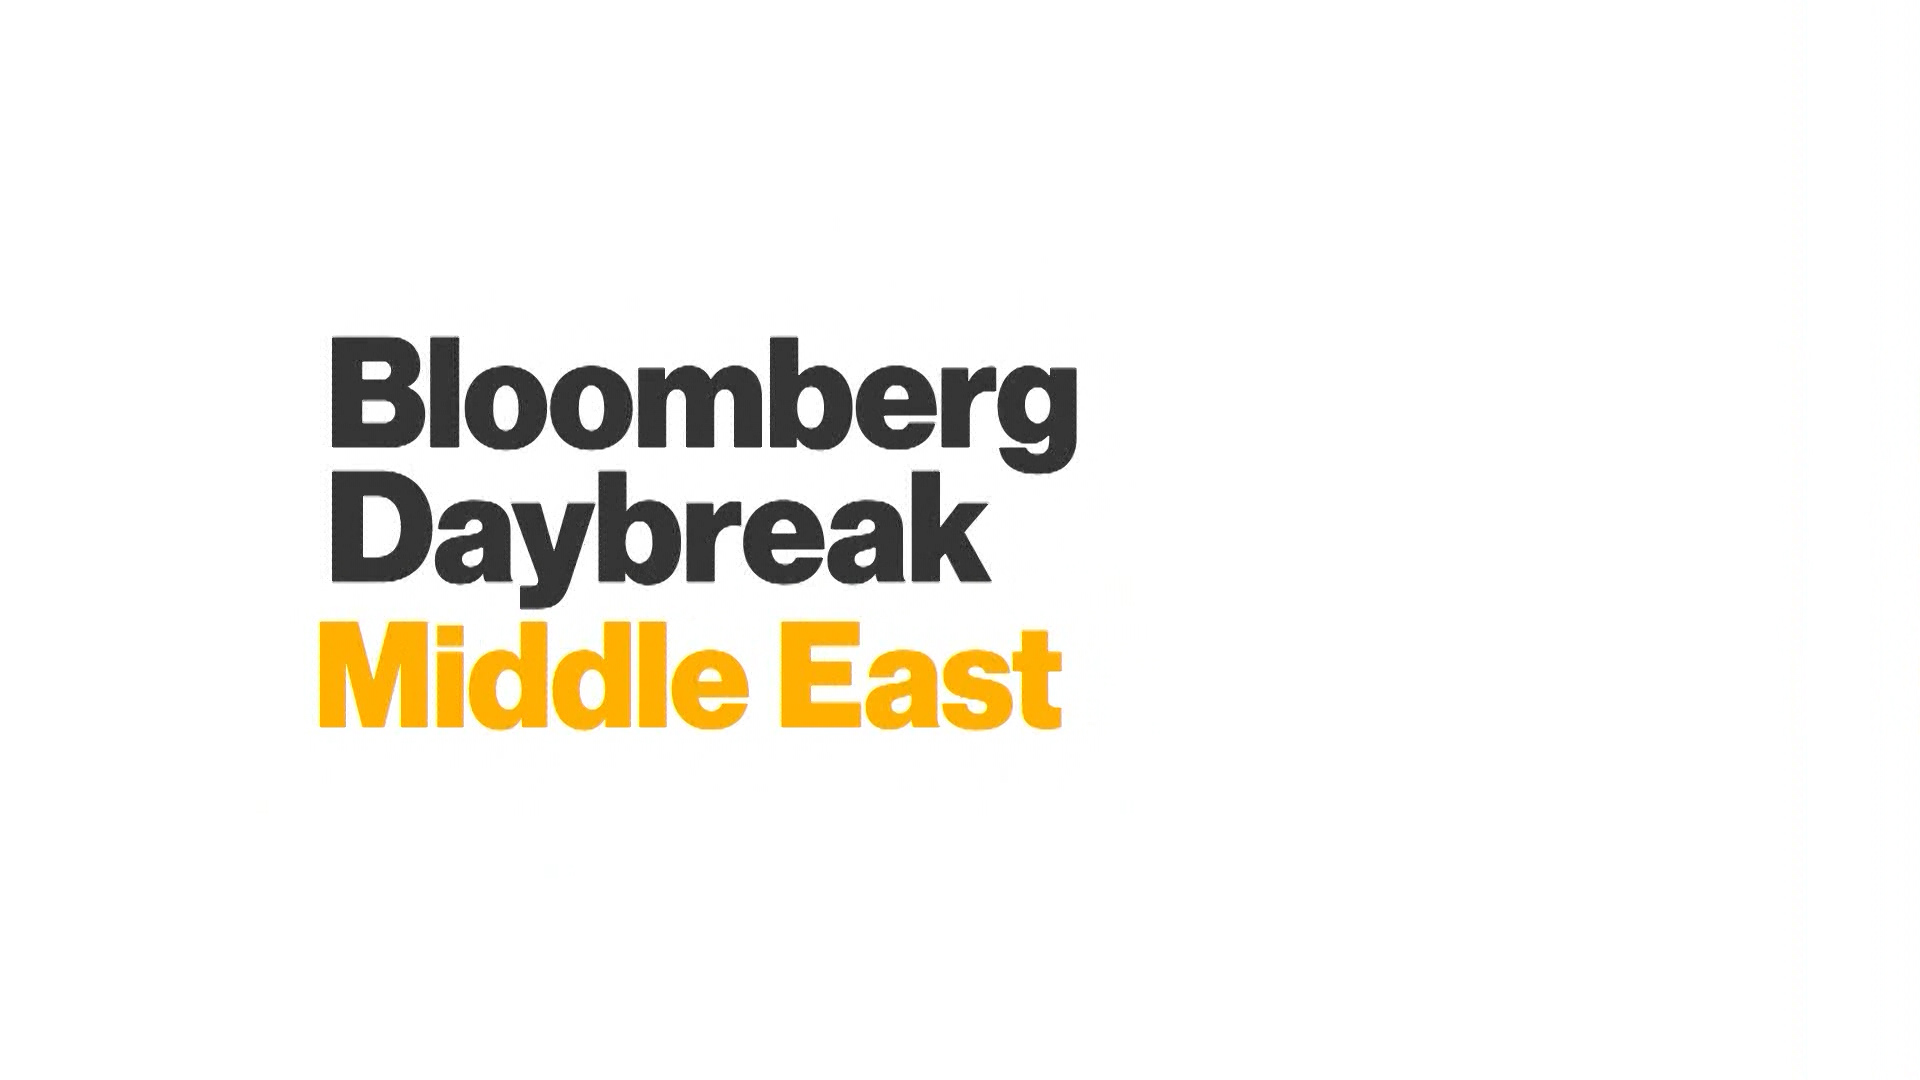 Bloomberg Daybreak Middle East Full Show 02 06 2020 Bloomberg Images, Photos, Reviews